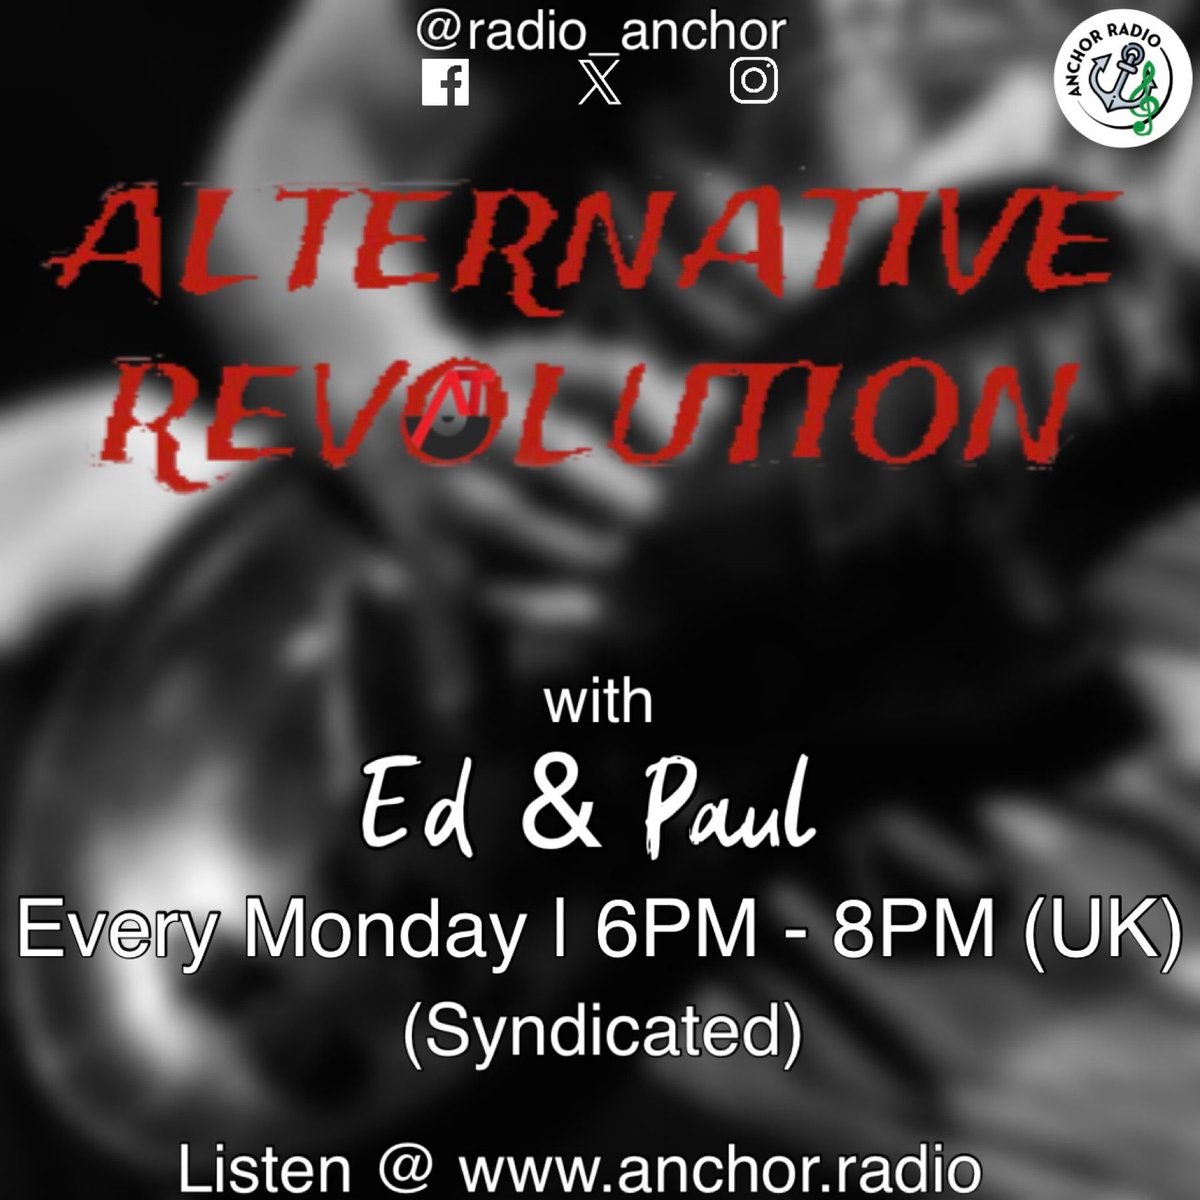 Alternative Revolution is live at 6pm tonight on anchor.radio. Sadly no Ed this week, but still plenty of top new releases, from the likes of @saloon_dion,@thearistonband,@roomforeband, @sophdoyleryder,@brogealband,@WorldWideWelly, @SisterEnvyBand,@moulditsmould & more